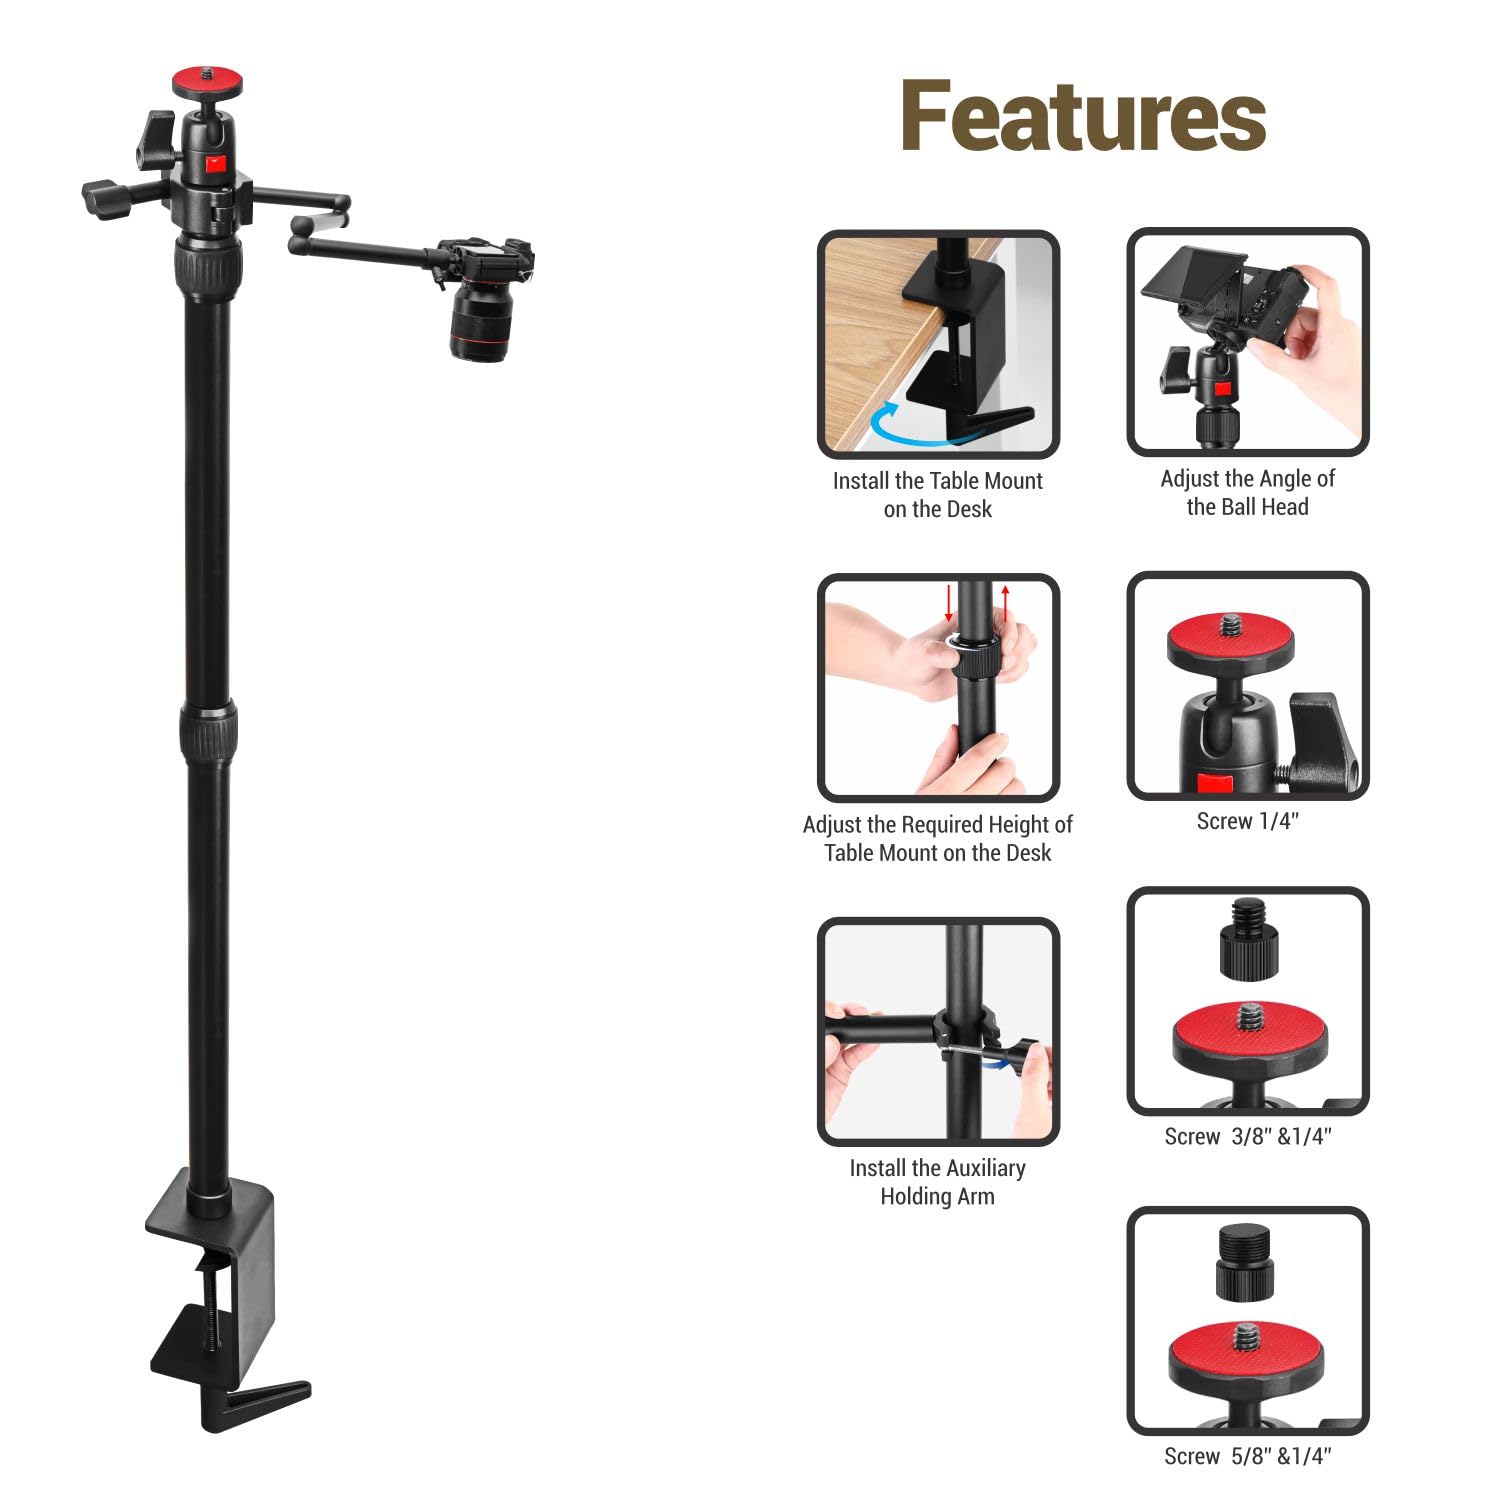 Digitek (DTMHA 001 )Table Mount with Auxiliary Holding Arm for Stream, Overhead Video, Desktop, Bedroom, Bedhead, Office